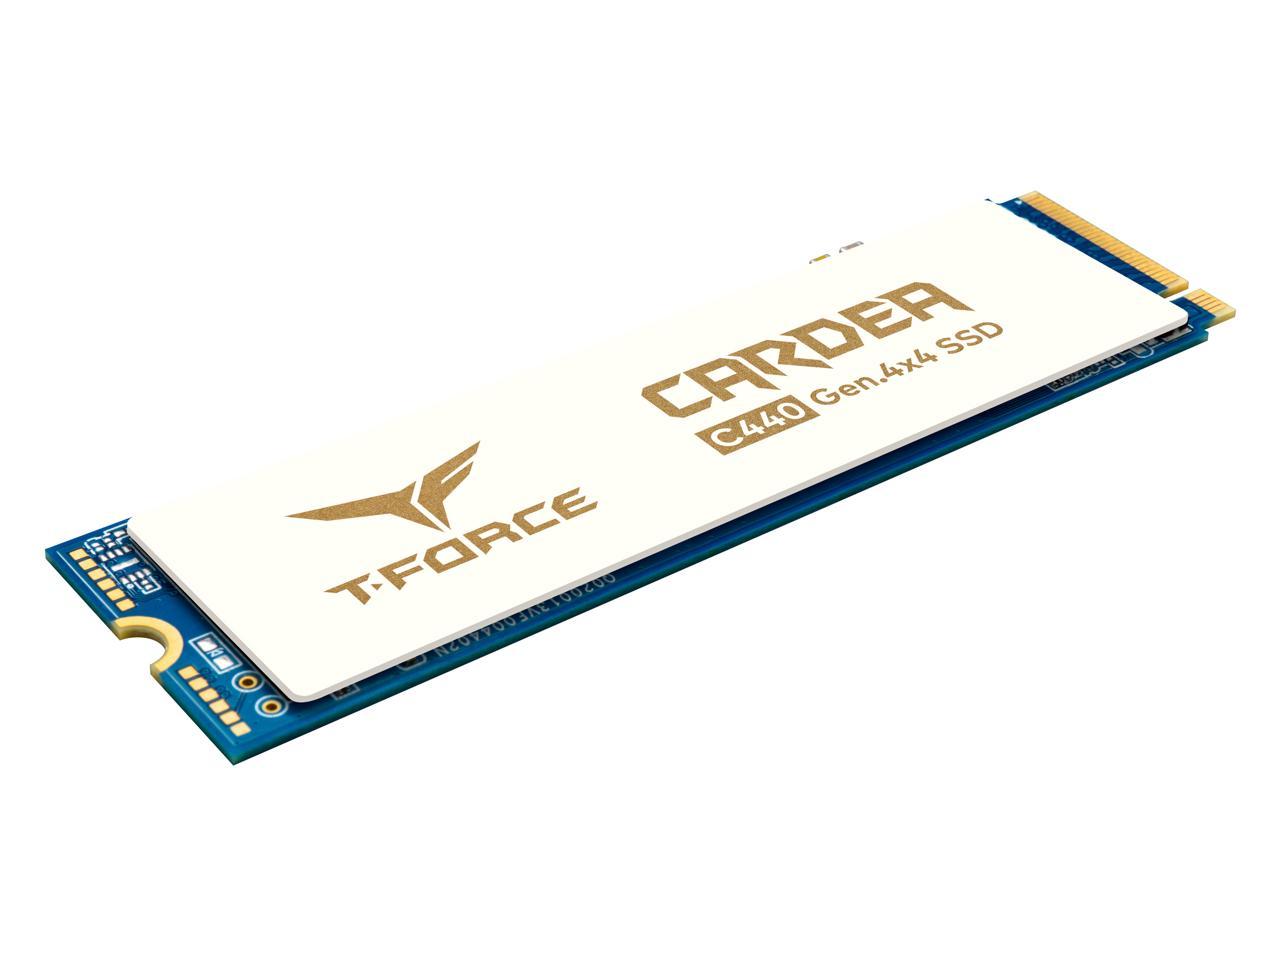 Team T-FORCE CARDEA Ceramic C440 M.2 2280 2TB PCIe Gen4 x4 with NVMe 1.3 3D NAND Internal Solid State Drive (SSD) TM8FPA002T0C410